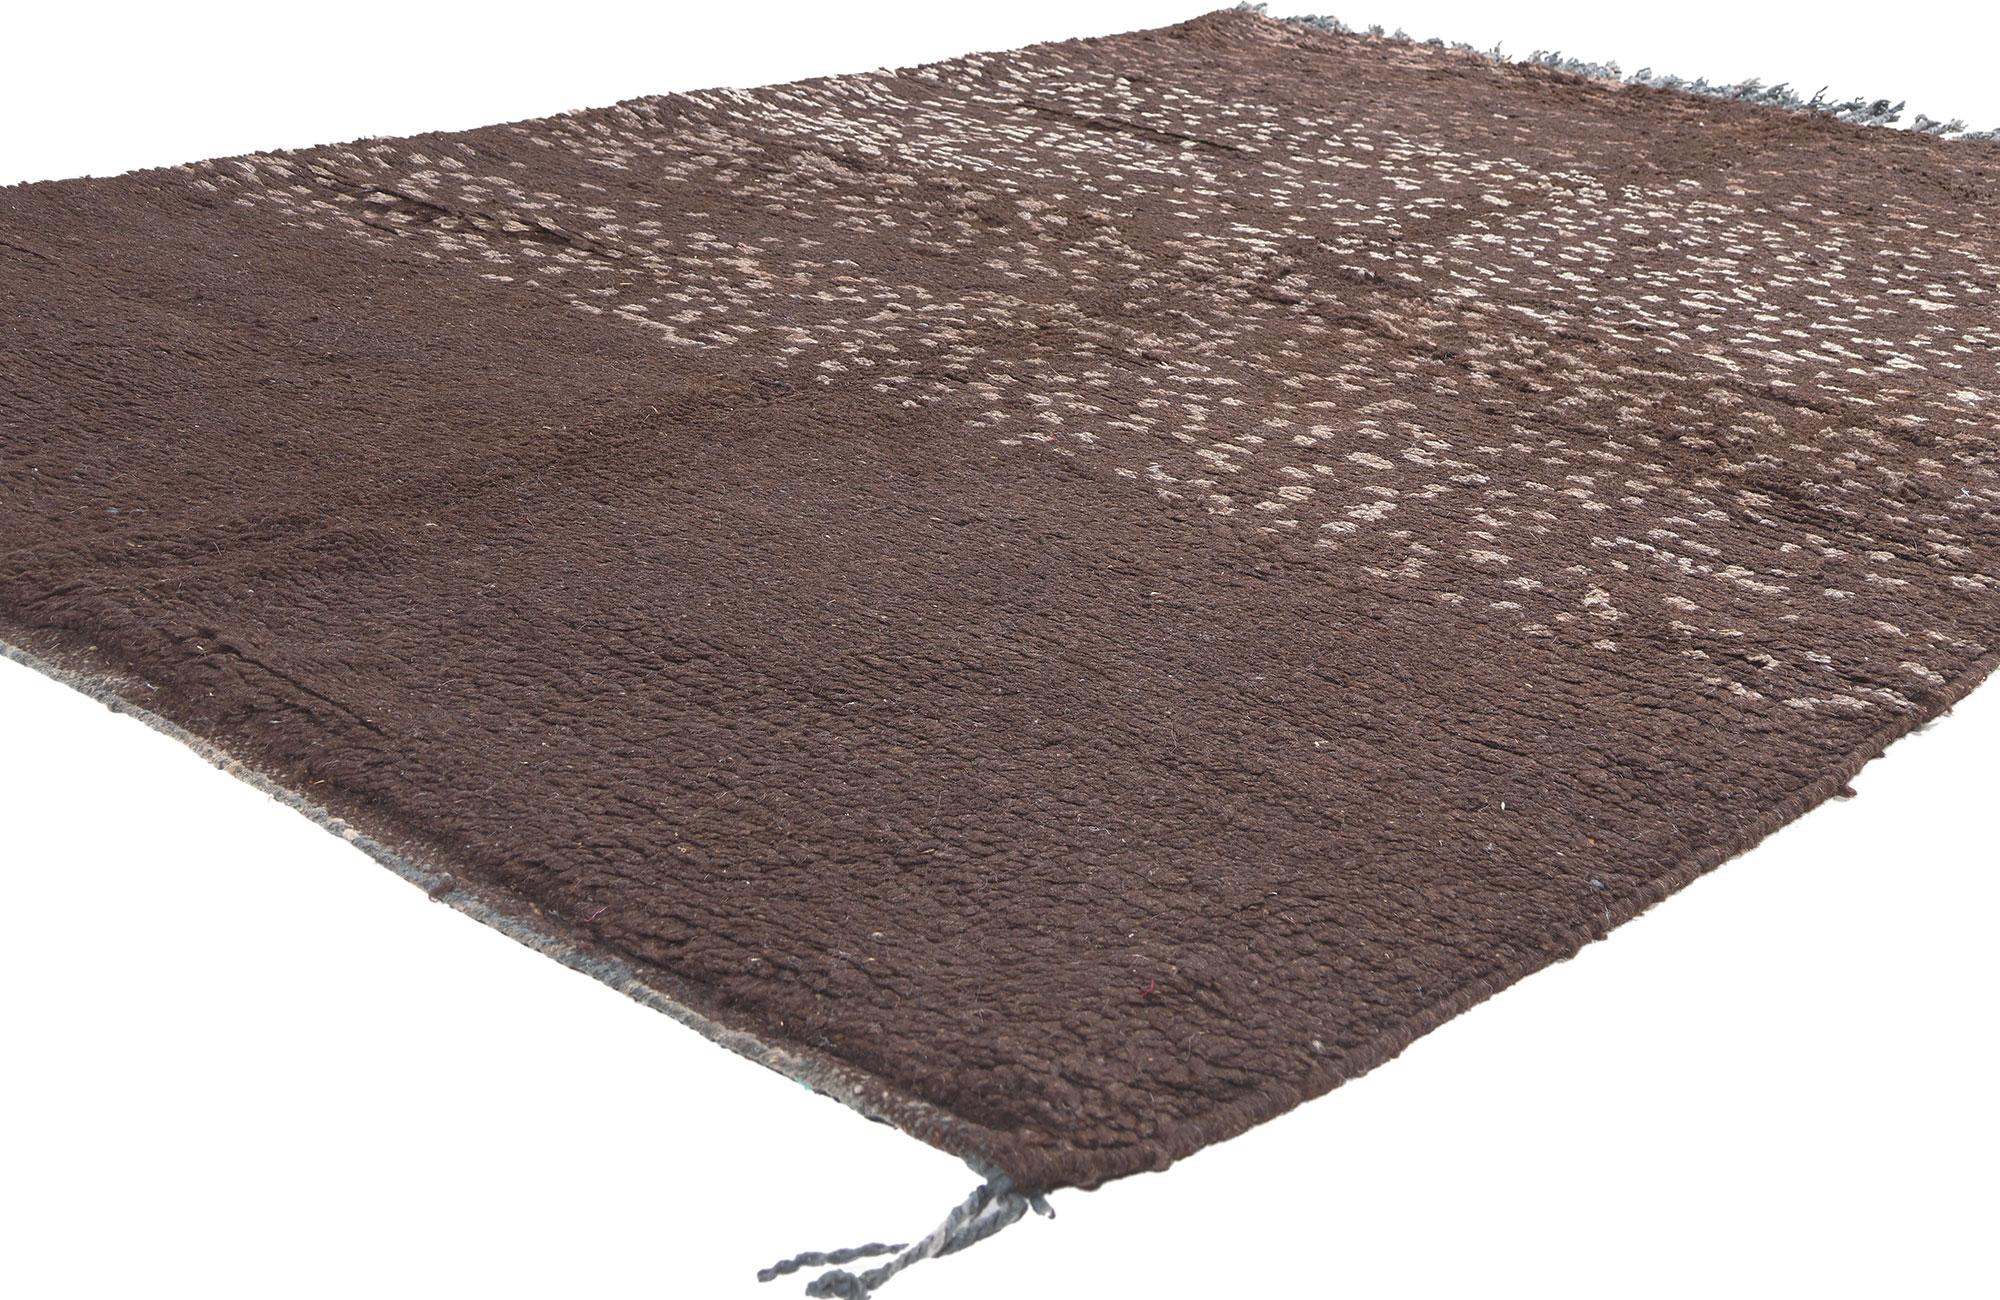 20281 Vintage Berber Moroccan Rug, 05'06 x 08'01. 

Behold the artistry woven into this hand-knotted wool vintage Moroccan rug, where tribal enchantment converges with Biomimicry. A dark earthy-colored backdrop serves as the canvas for a mesmerizing